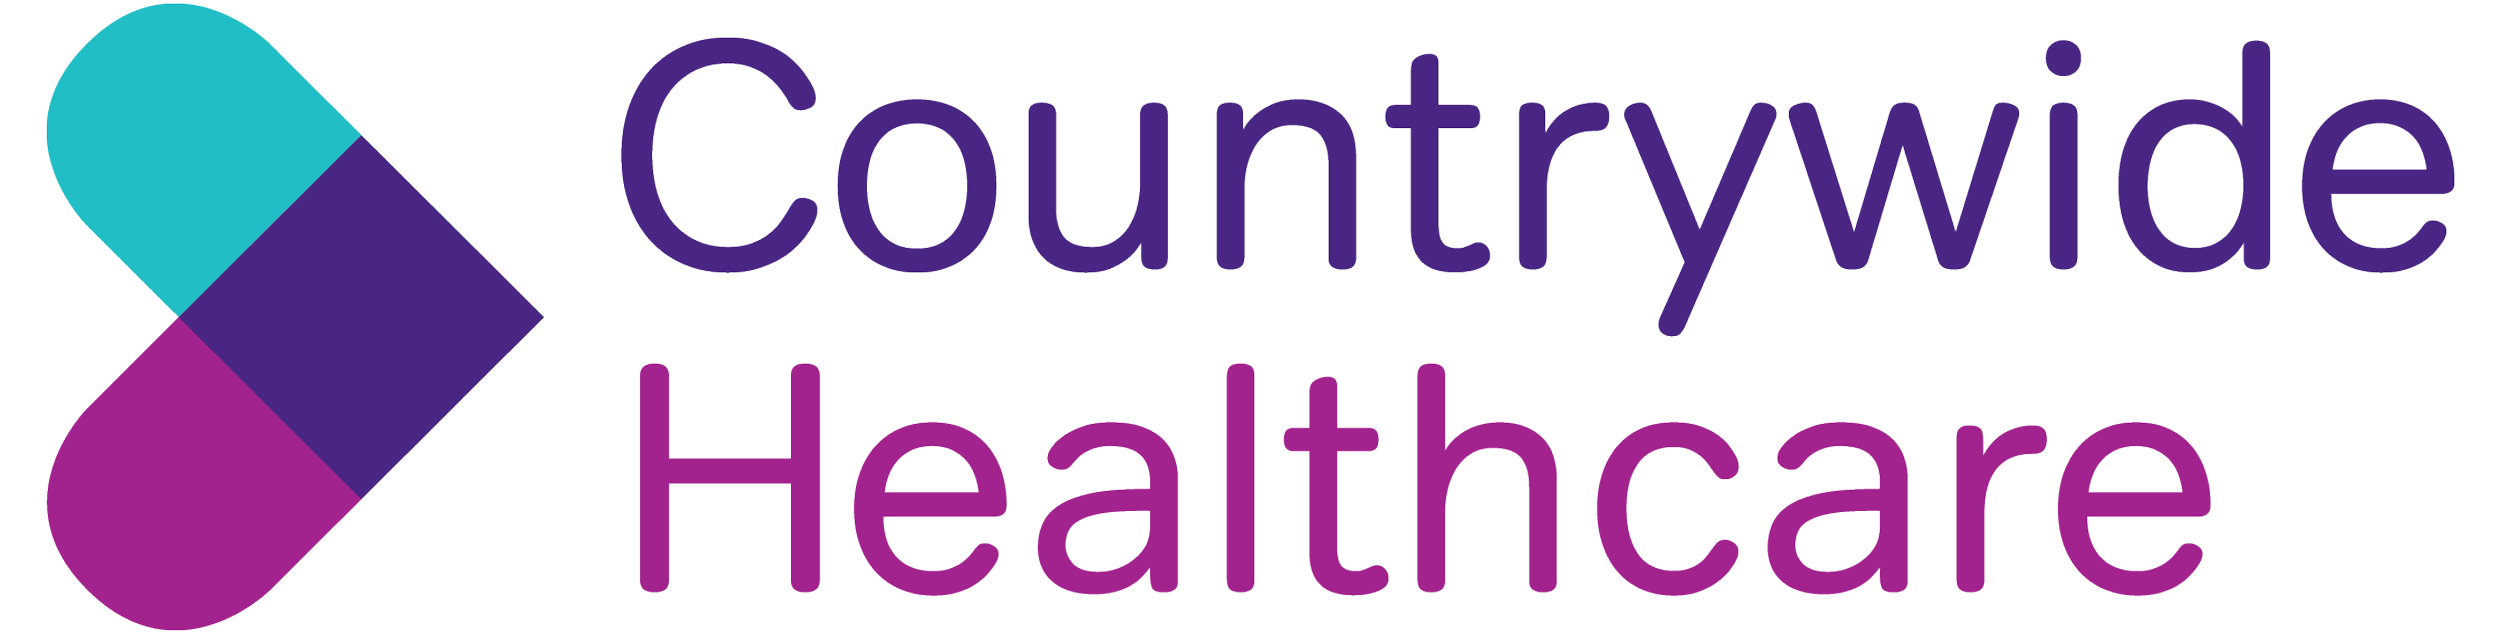 Countrywide Healthcare Supplies